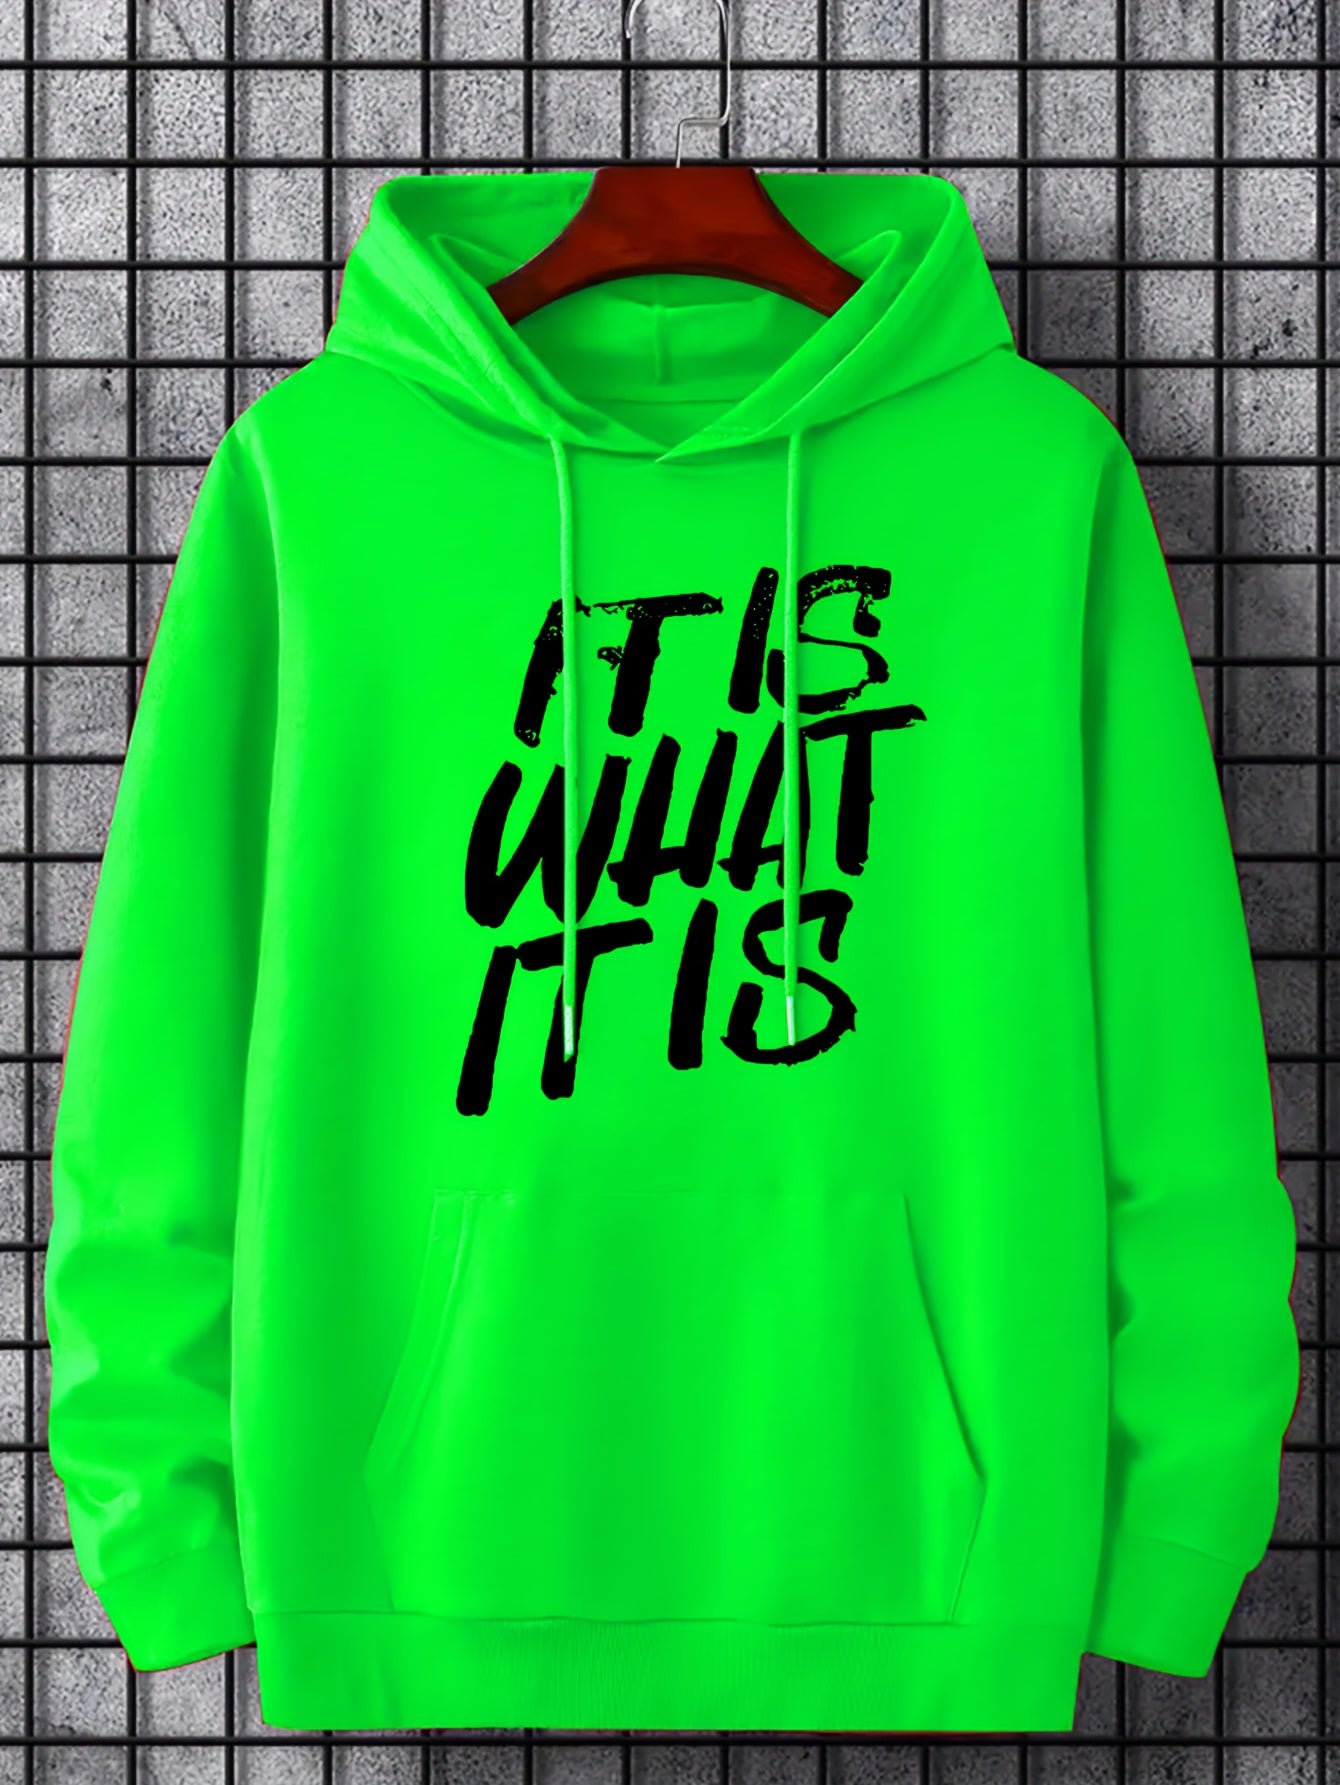 "IT IS WHAT IT IS" Print, Hoodies For Men, Graphic Sweatshirt With Kangaroo Pocket, Comfy Trendy Hooded Pullover, Mens Clothing For Fall Winter